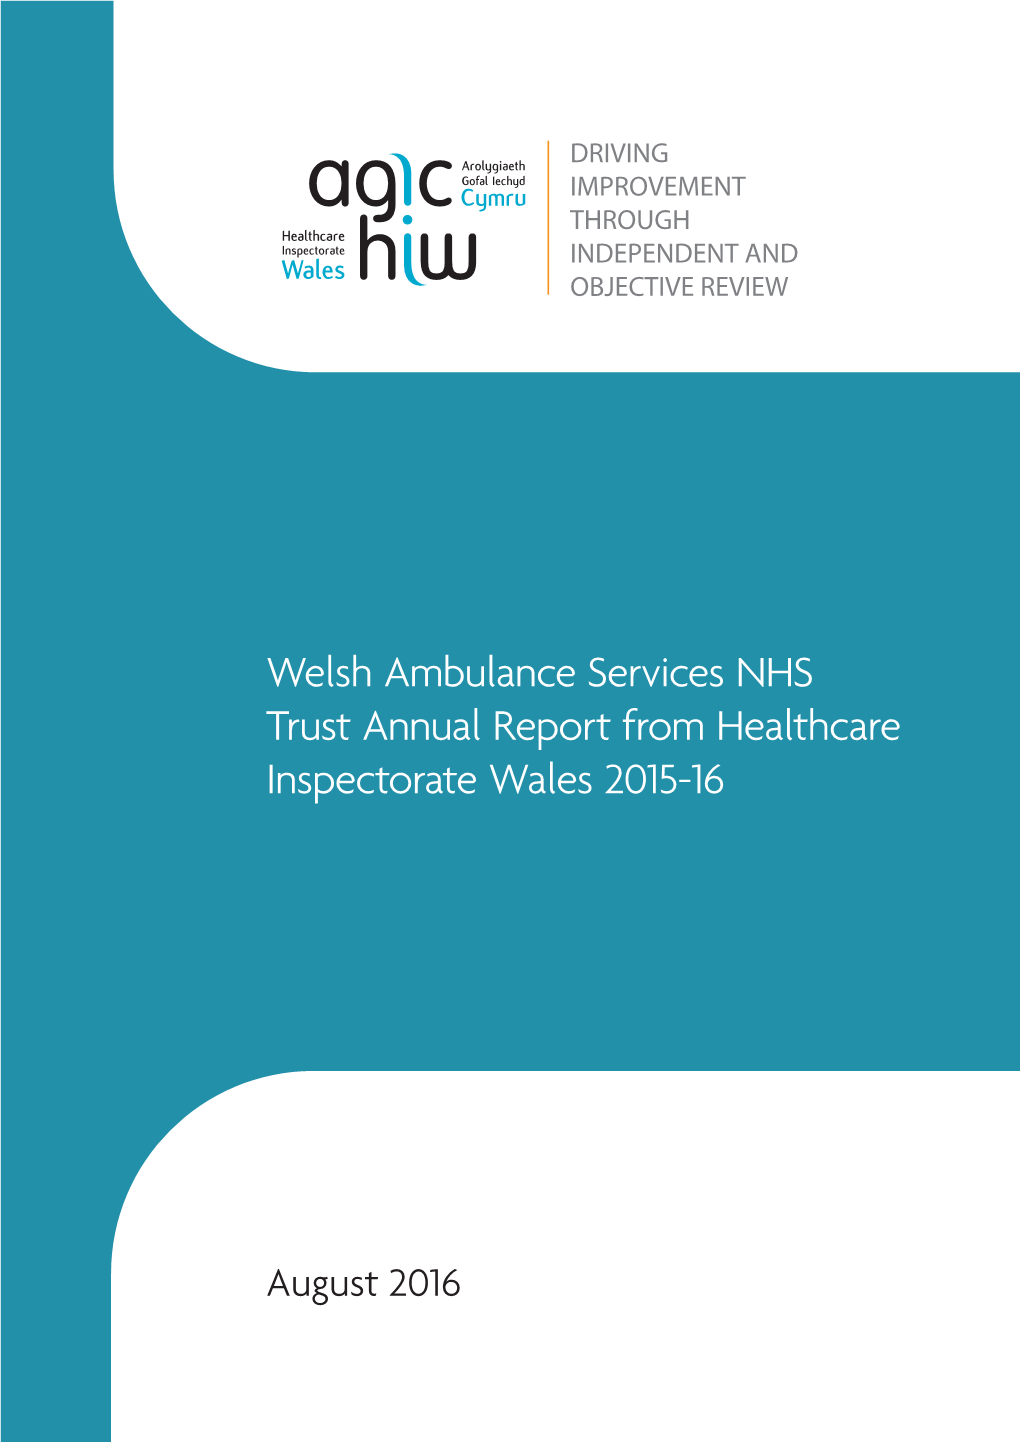 Welsh Ambulance Services NHS Trust Annual Report from Healthcare Inspectorate Wales 2015-16